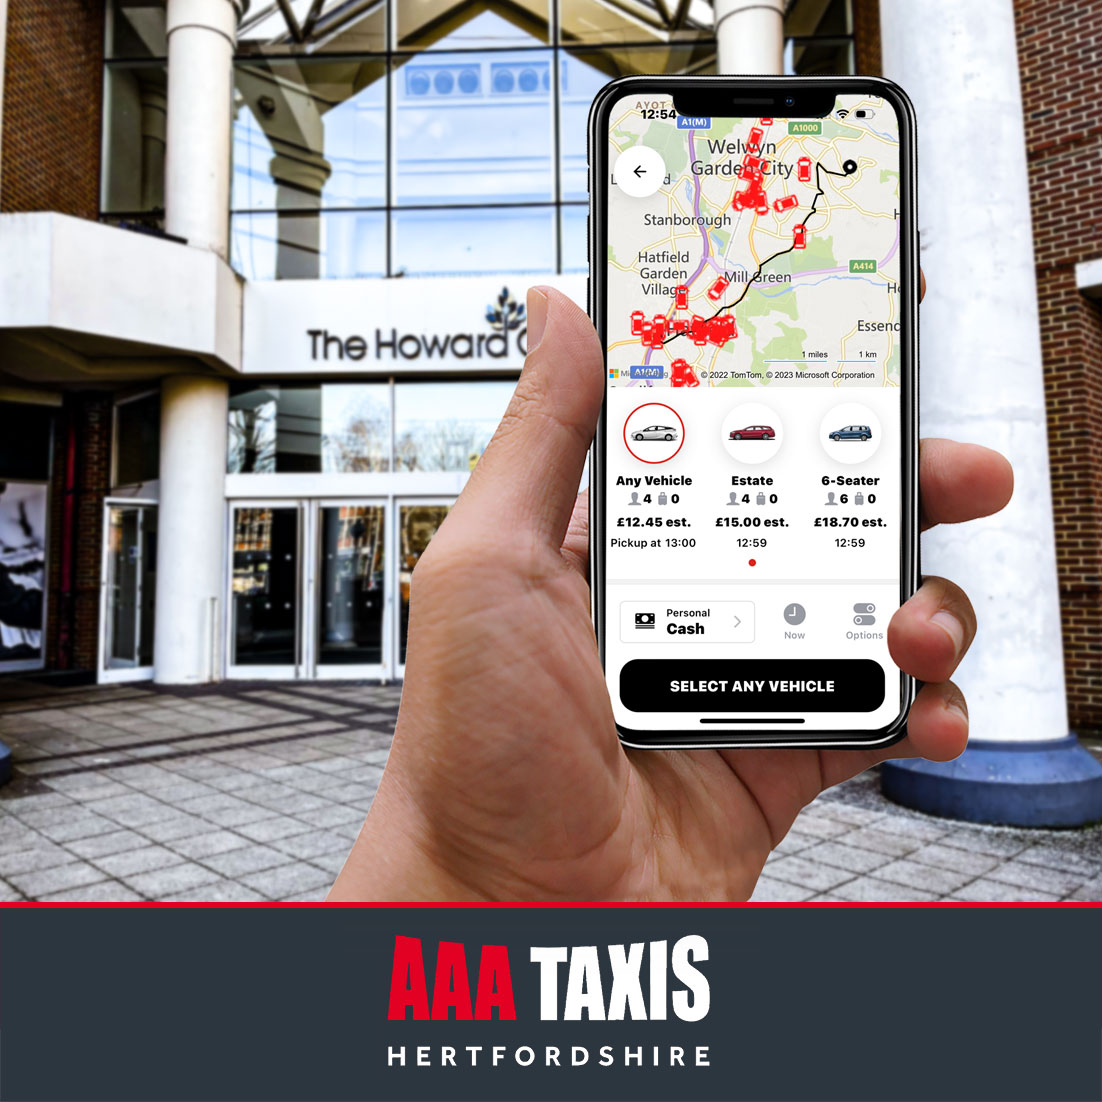 Shopping at The Howard Centre or The Galleria and need a taxi?
Book your next taxi, download the AAA Taxis phone app: onelink.to/aaataxis  or call us on 01707 888 888   
#AAAtaxis #Hatfield #WGC #Hertford #Barnet #pottersbar #StAlbans